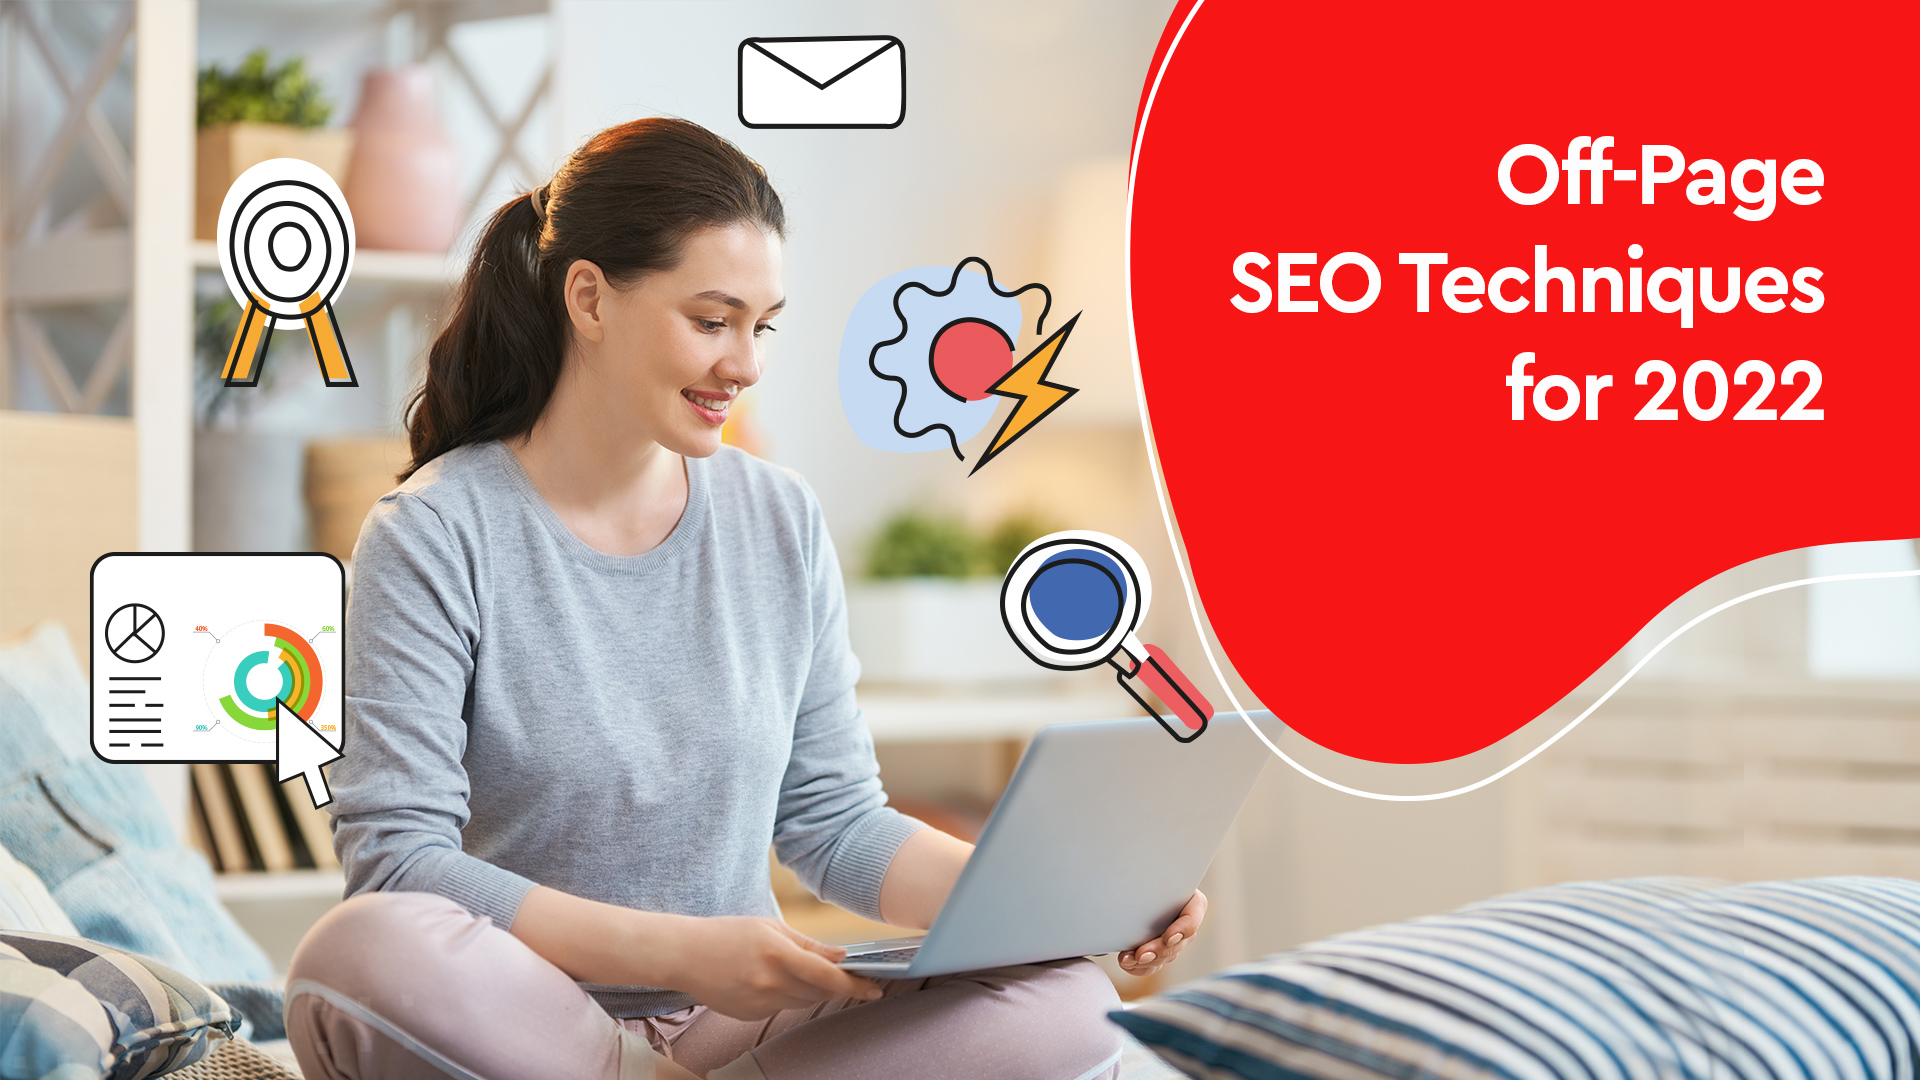 Off-Page SEO Techniques for 2022